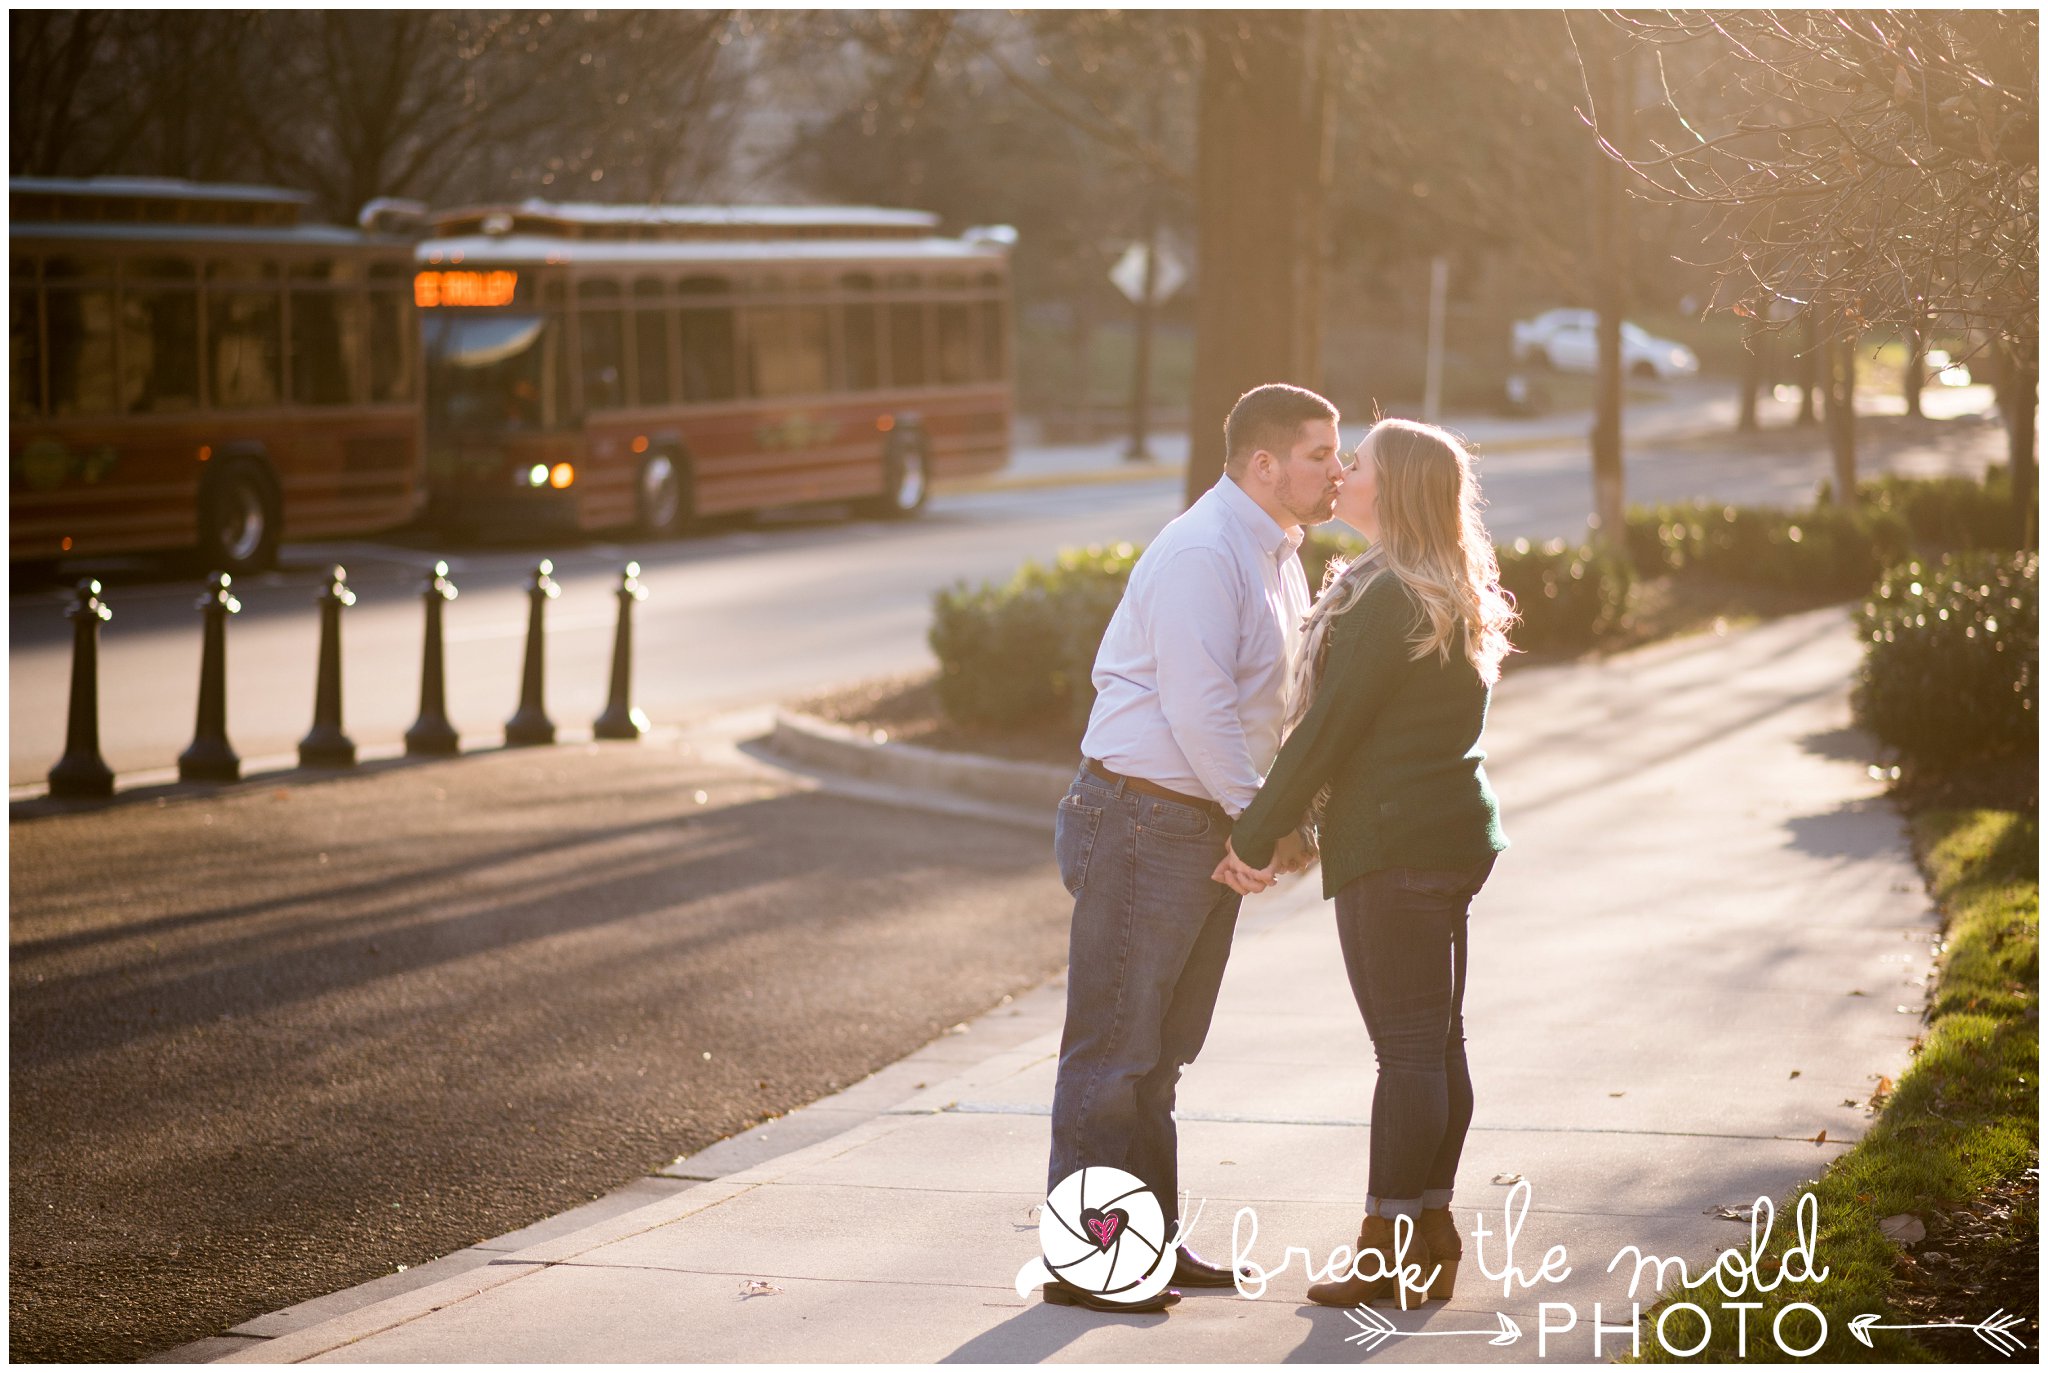 break-the-mold-photo-engagement-session-downtown-knoxville-try-before-you-buy_9871.jpg